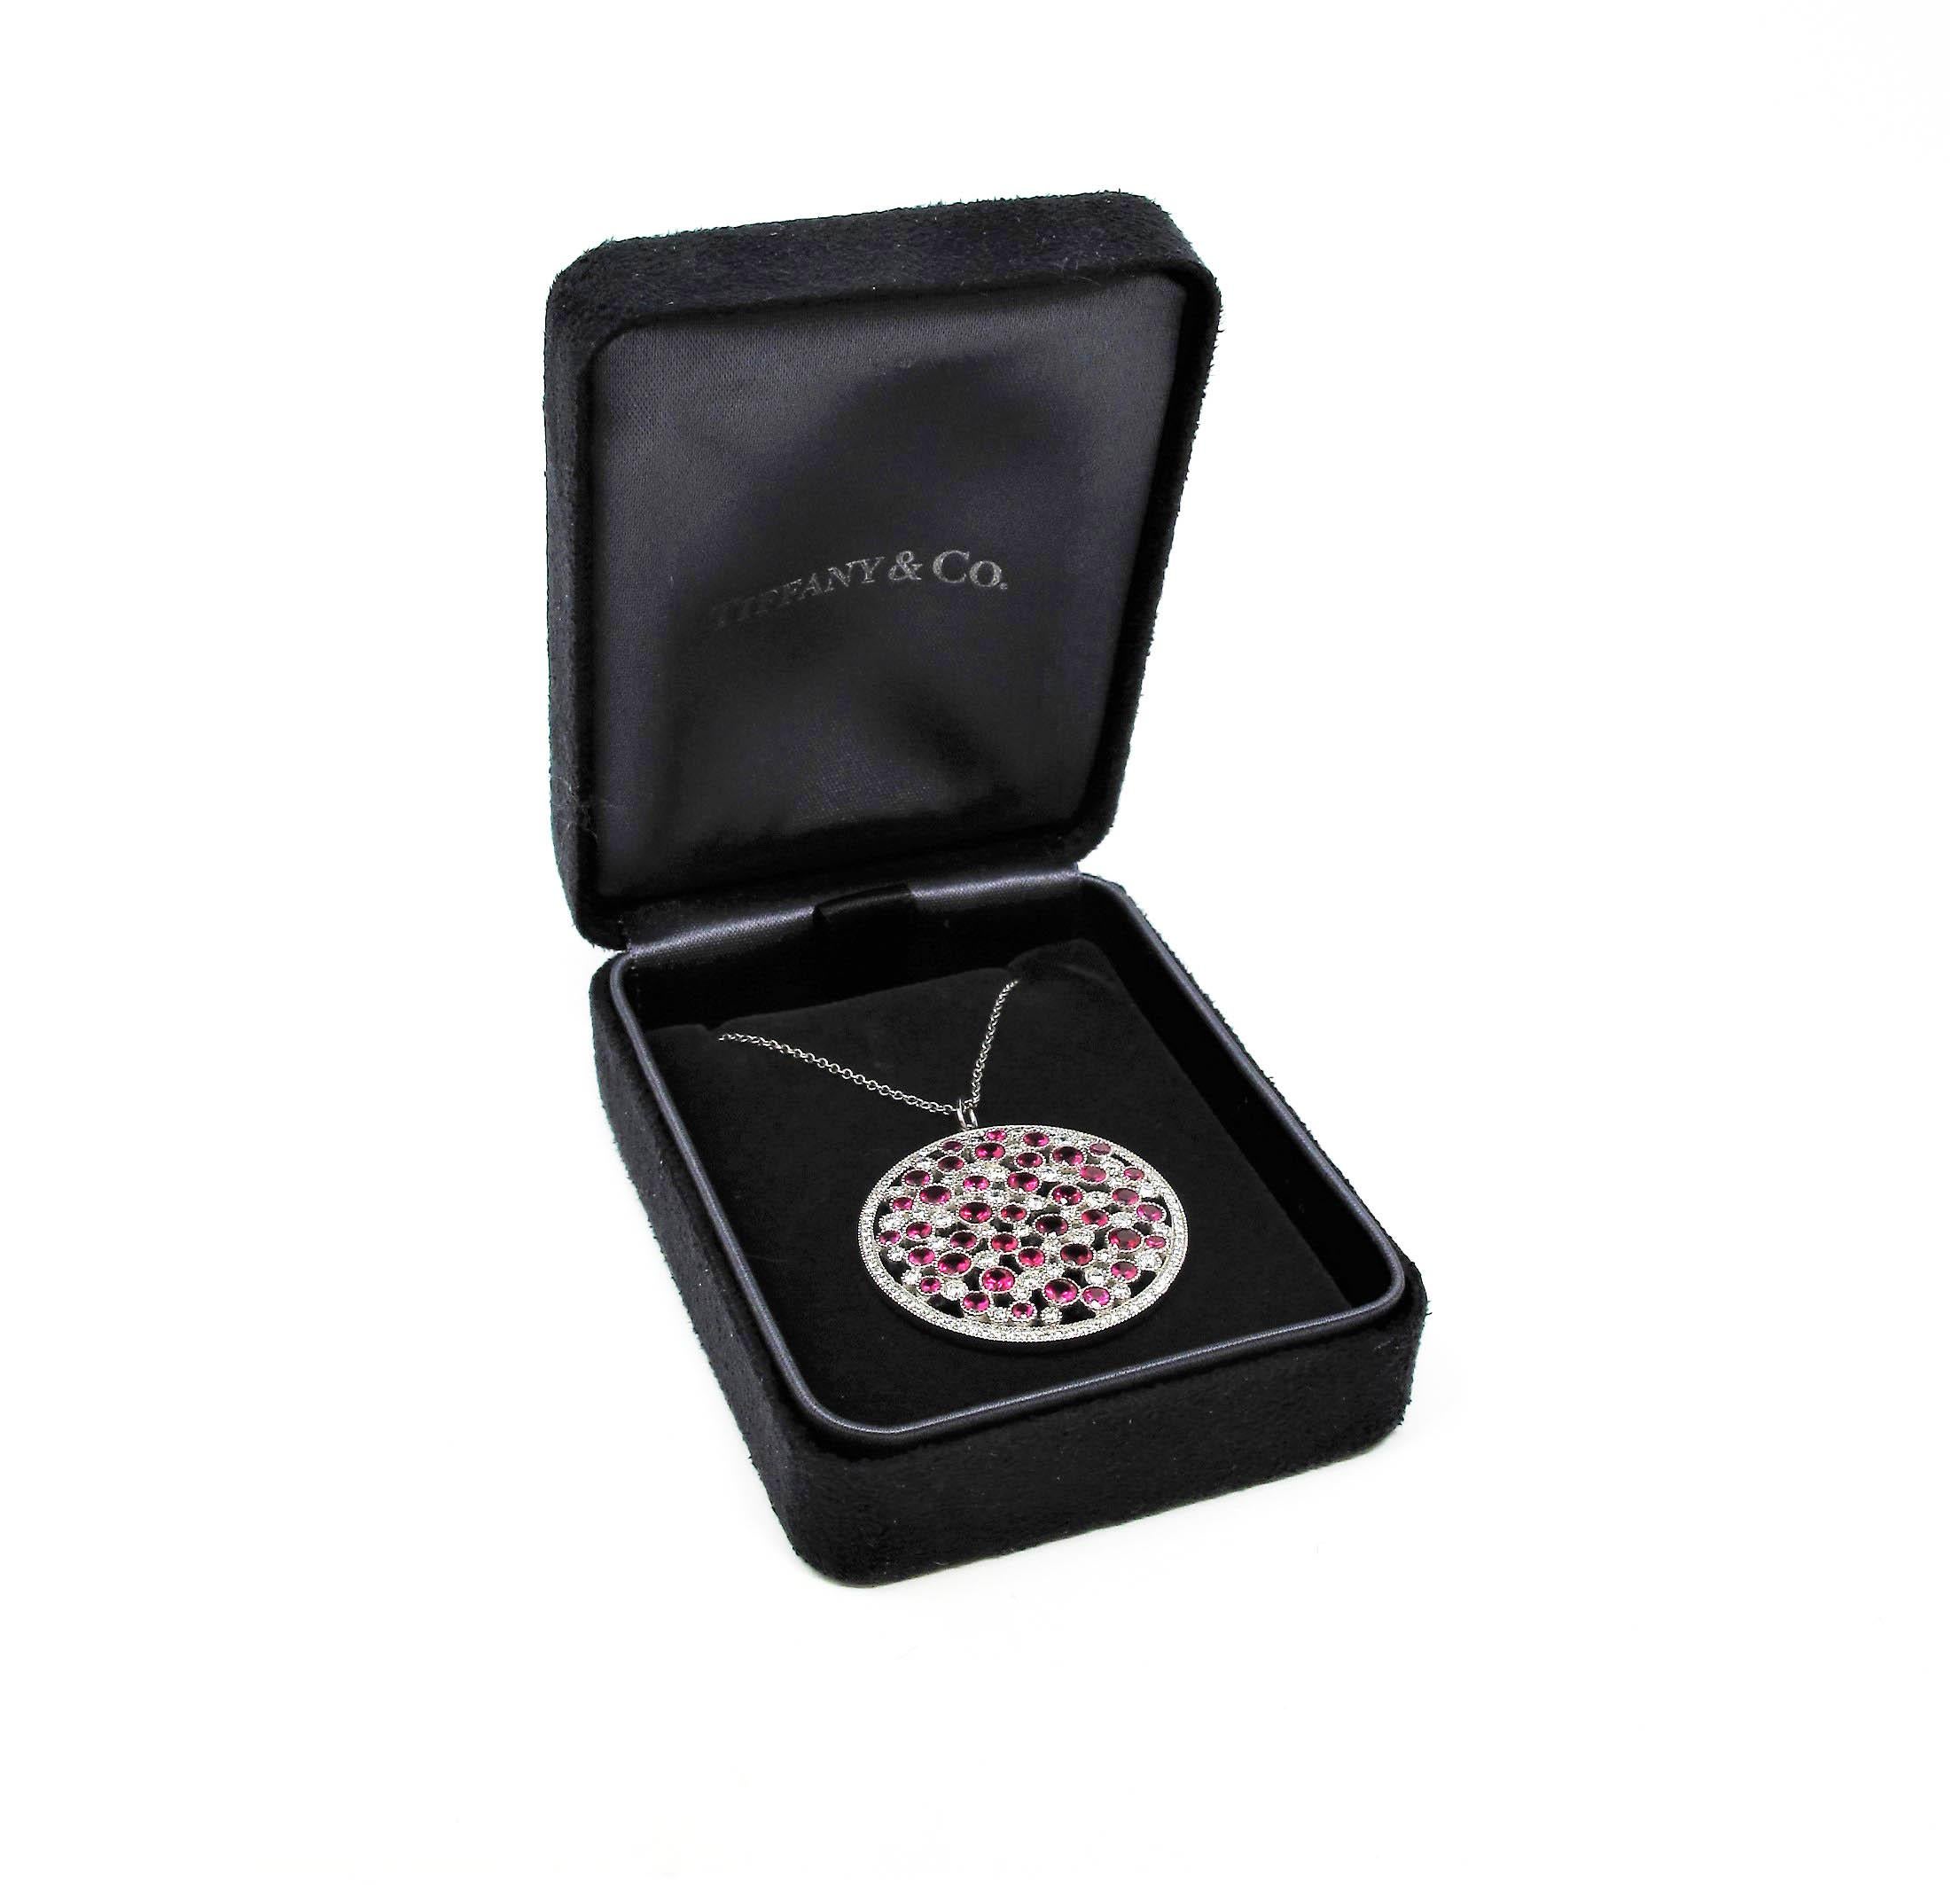 Looking to add a fun, yet sophisticated pop of color to your look? Then look no further than this absolutely stunning, brightly colored Cobblestone medallion necklace by renowned jewelry retailer, Tiffany & Co. Featuring luxurious, rich ruby